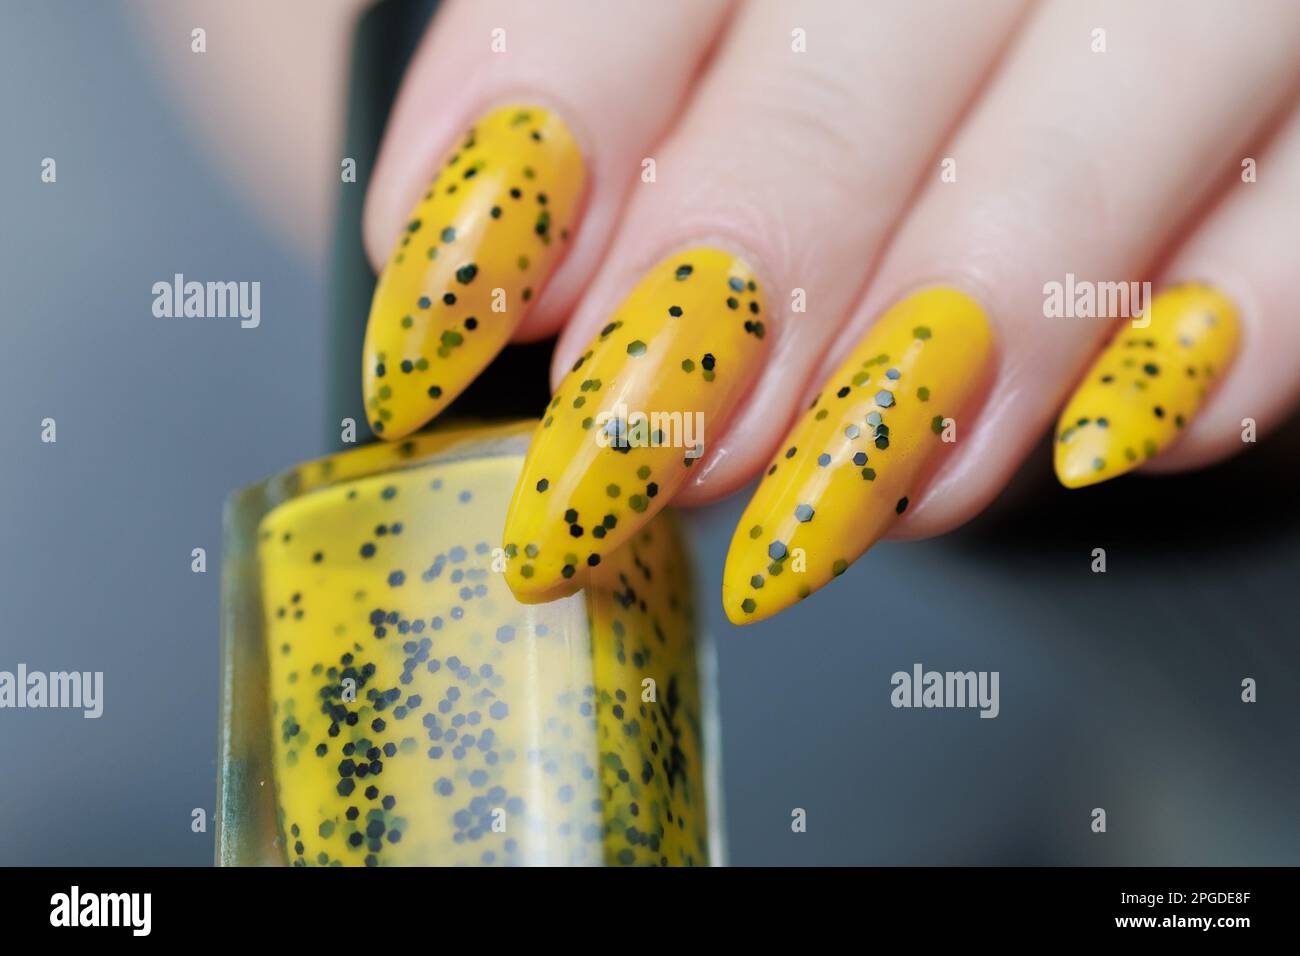 Female beautiful hand with long nails and a yellow and black nail polish Stock Photo